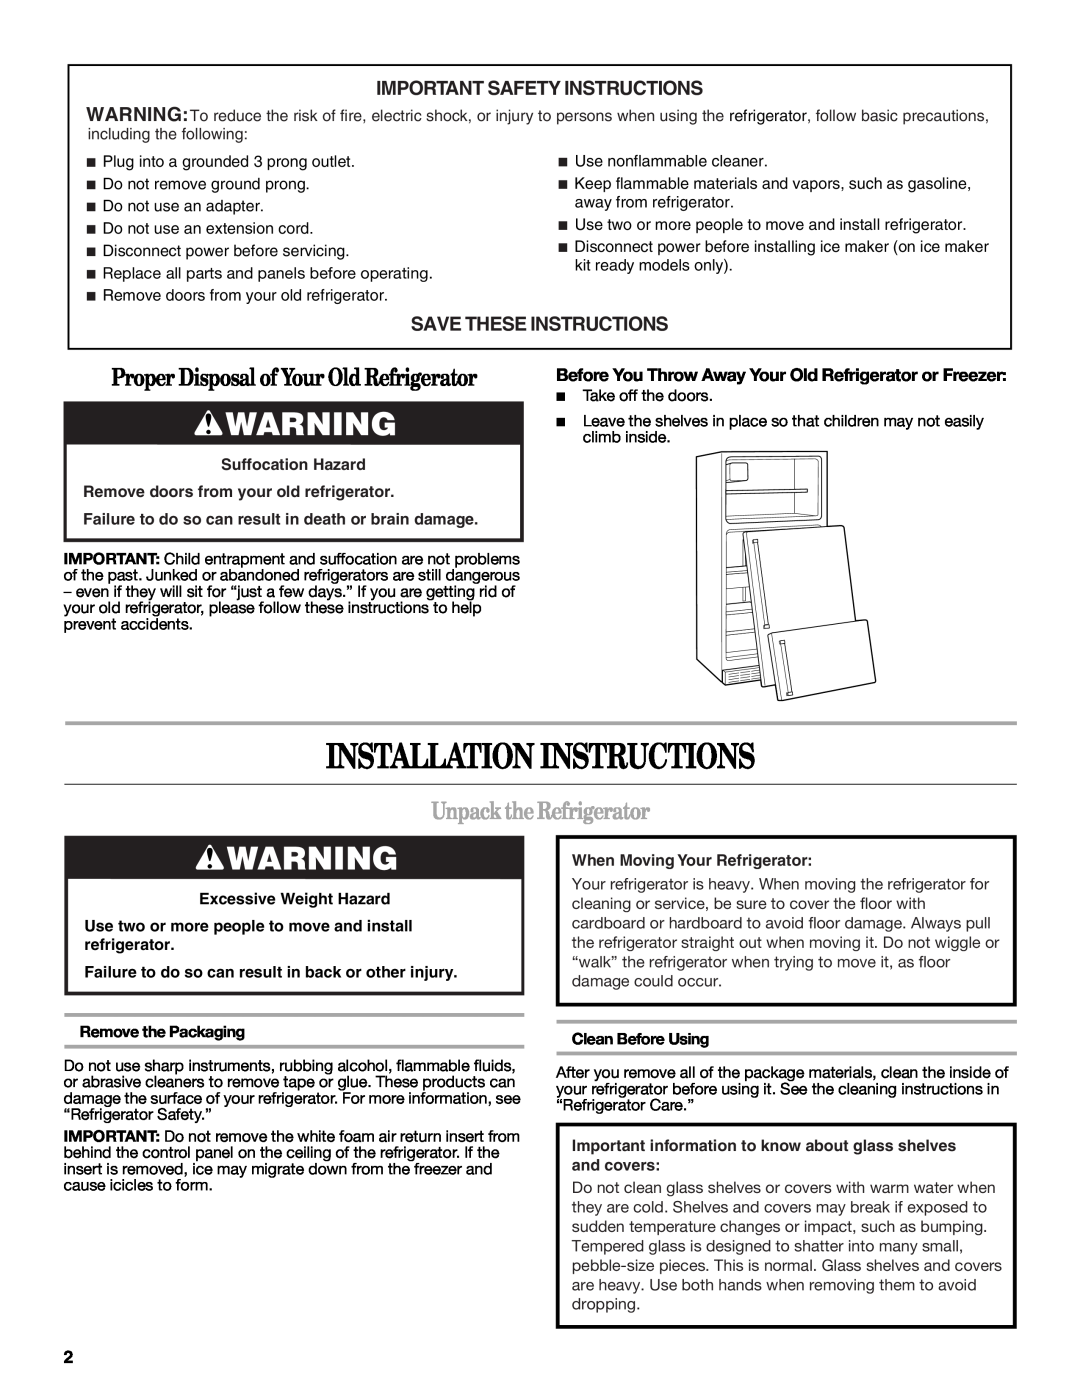 Whirlpool WRT138TFYB Installation Instructions, Unpack the Refrigerator, Important Safety Instructions, Clean Before Using 